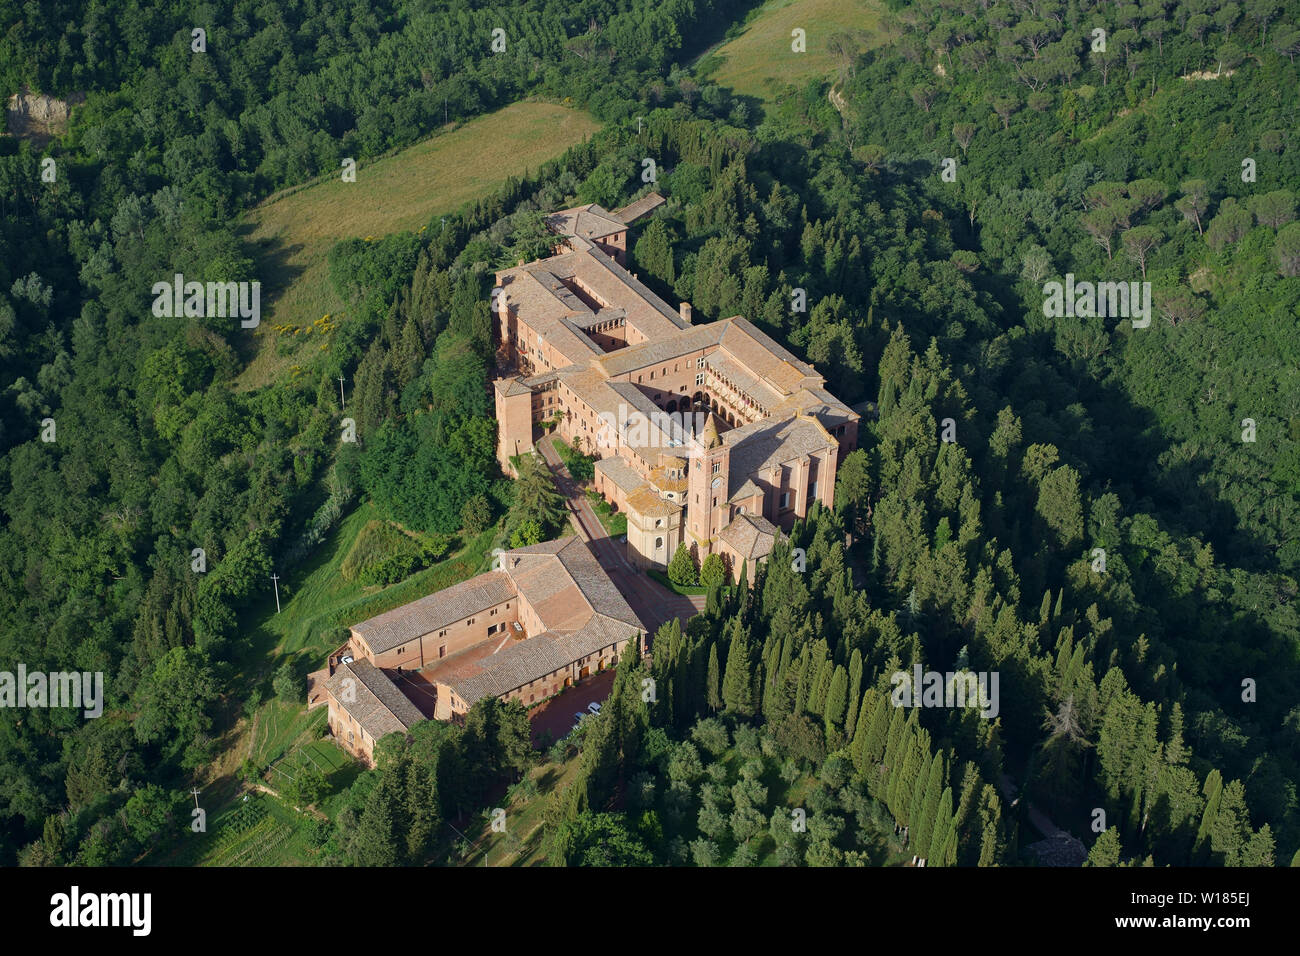 AERIAL VIEW. Secluded abbey in a setting of wooded hills. Monte Oliveto  Maggiore abbey, Asciano, Province of Siena, Tuscany, Italy Stock Photo -  Alamy